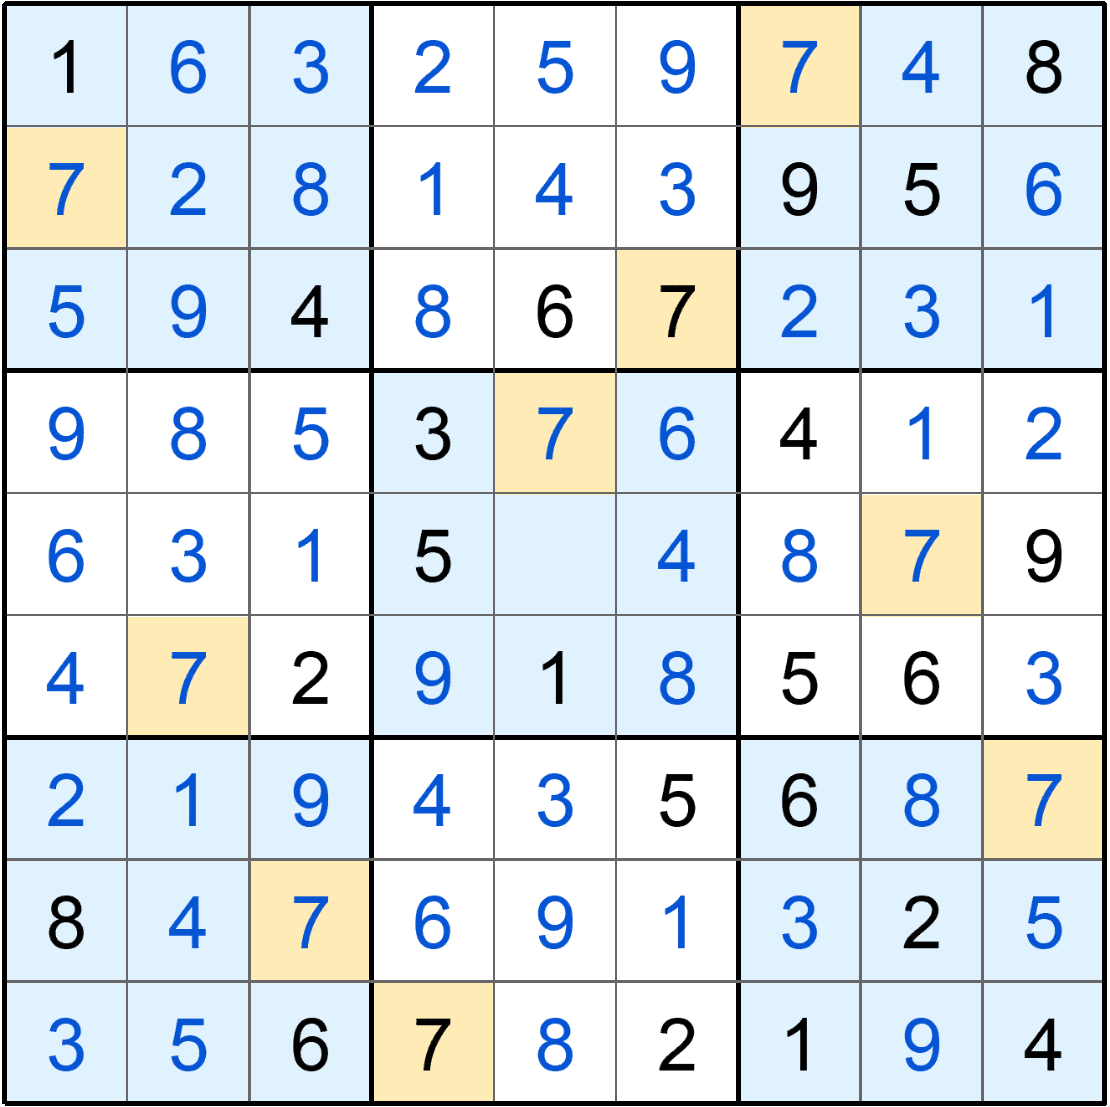 Puzzle Page Sudoku October 3 2019 Answers PuzzlePageAnswers net